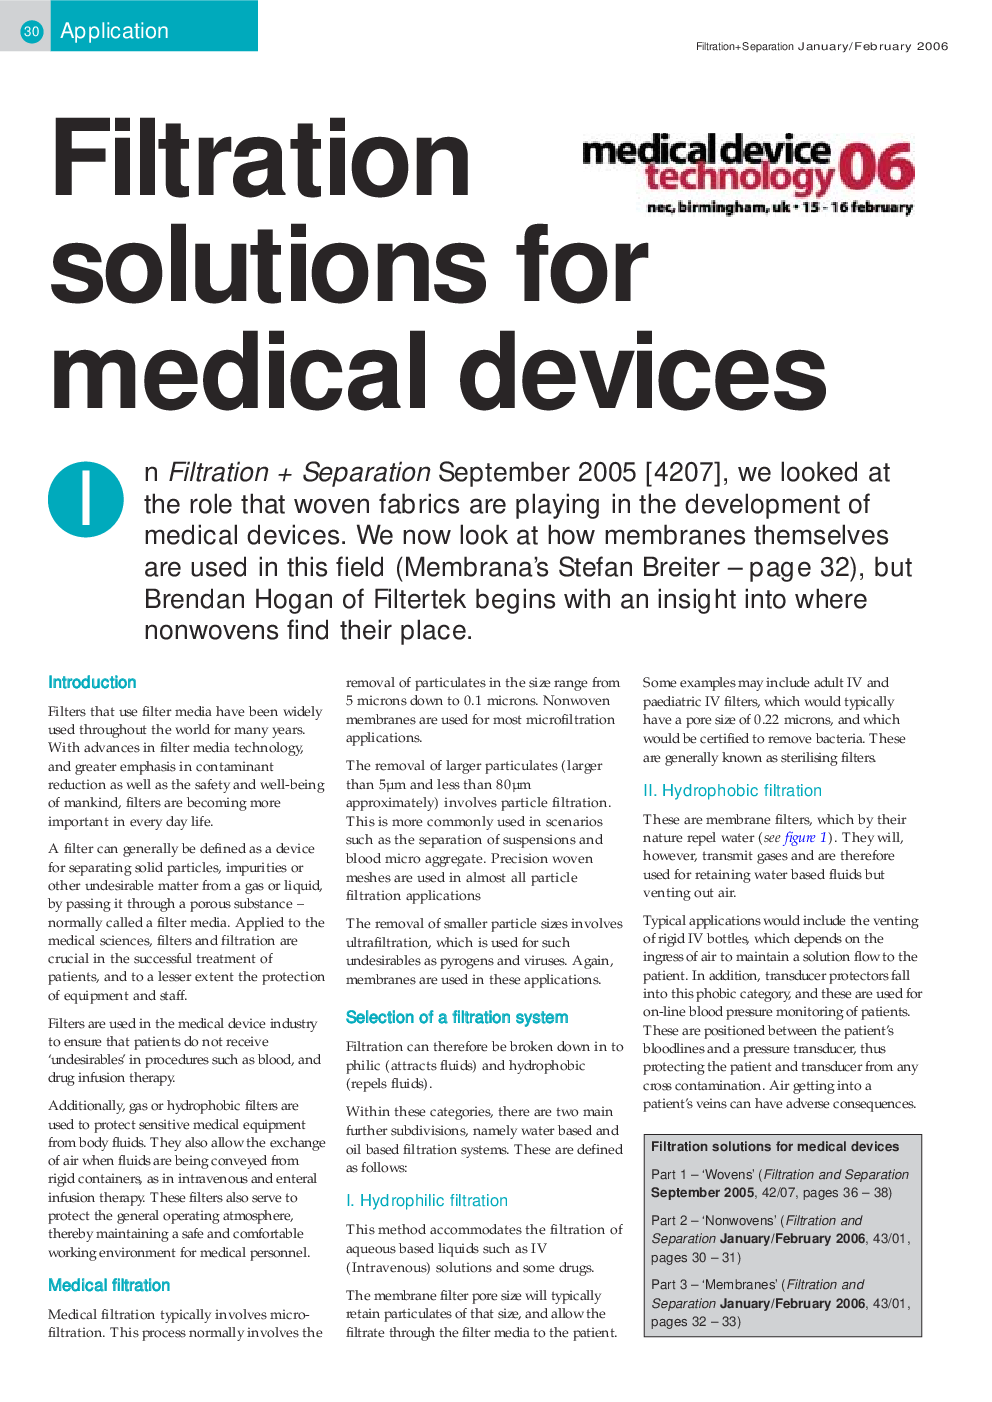 Filtration solutions for medical devices